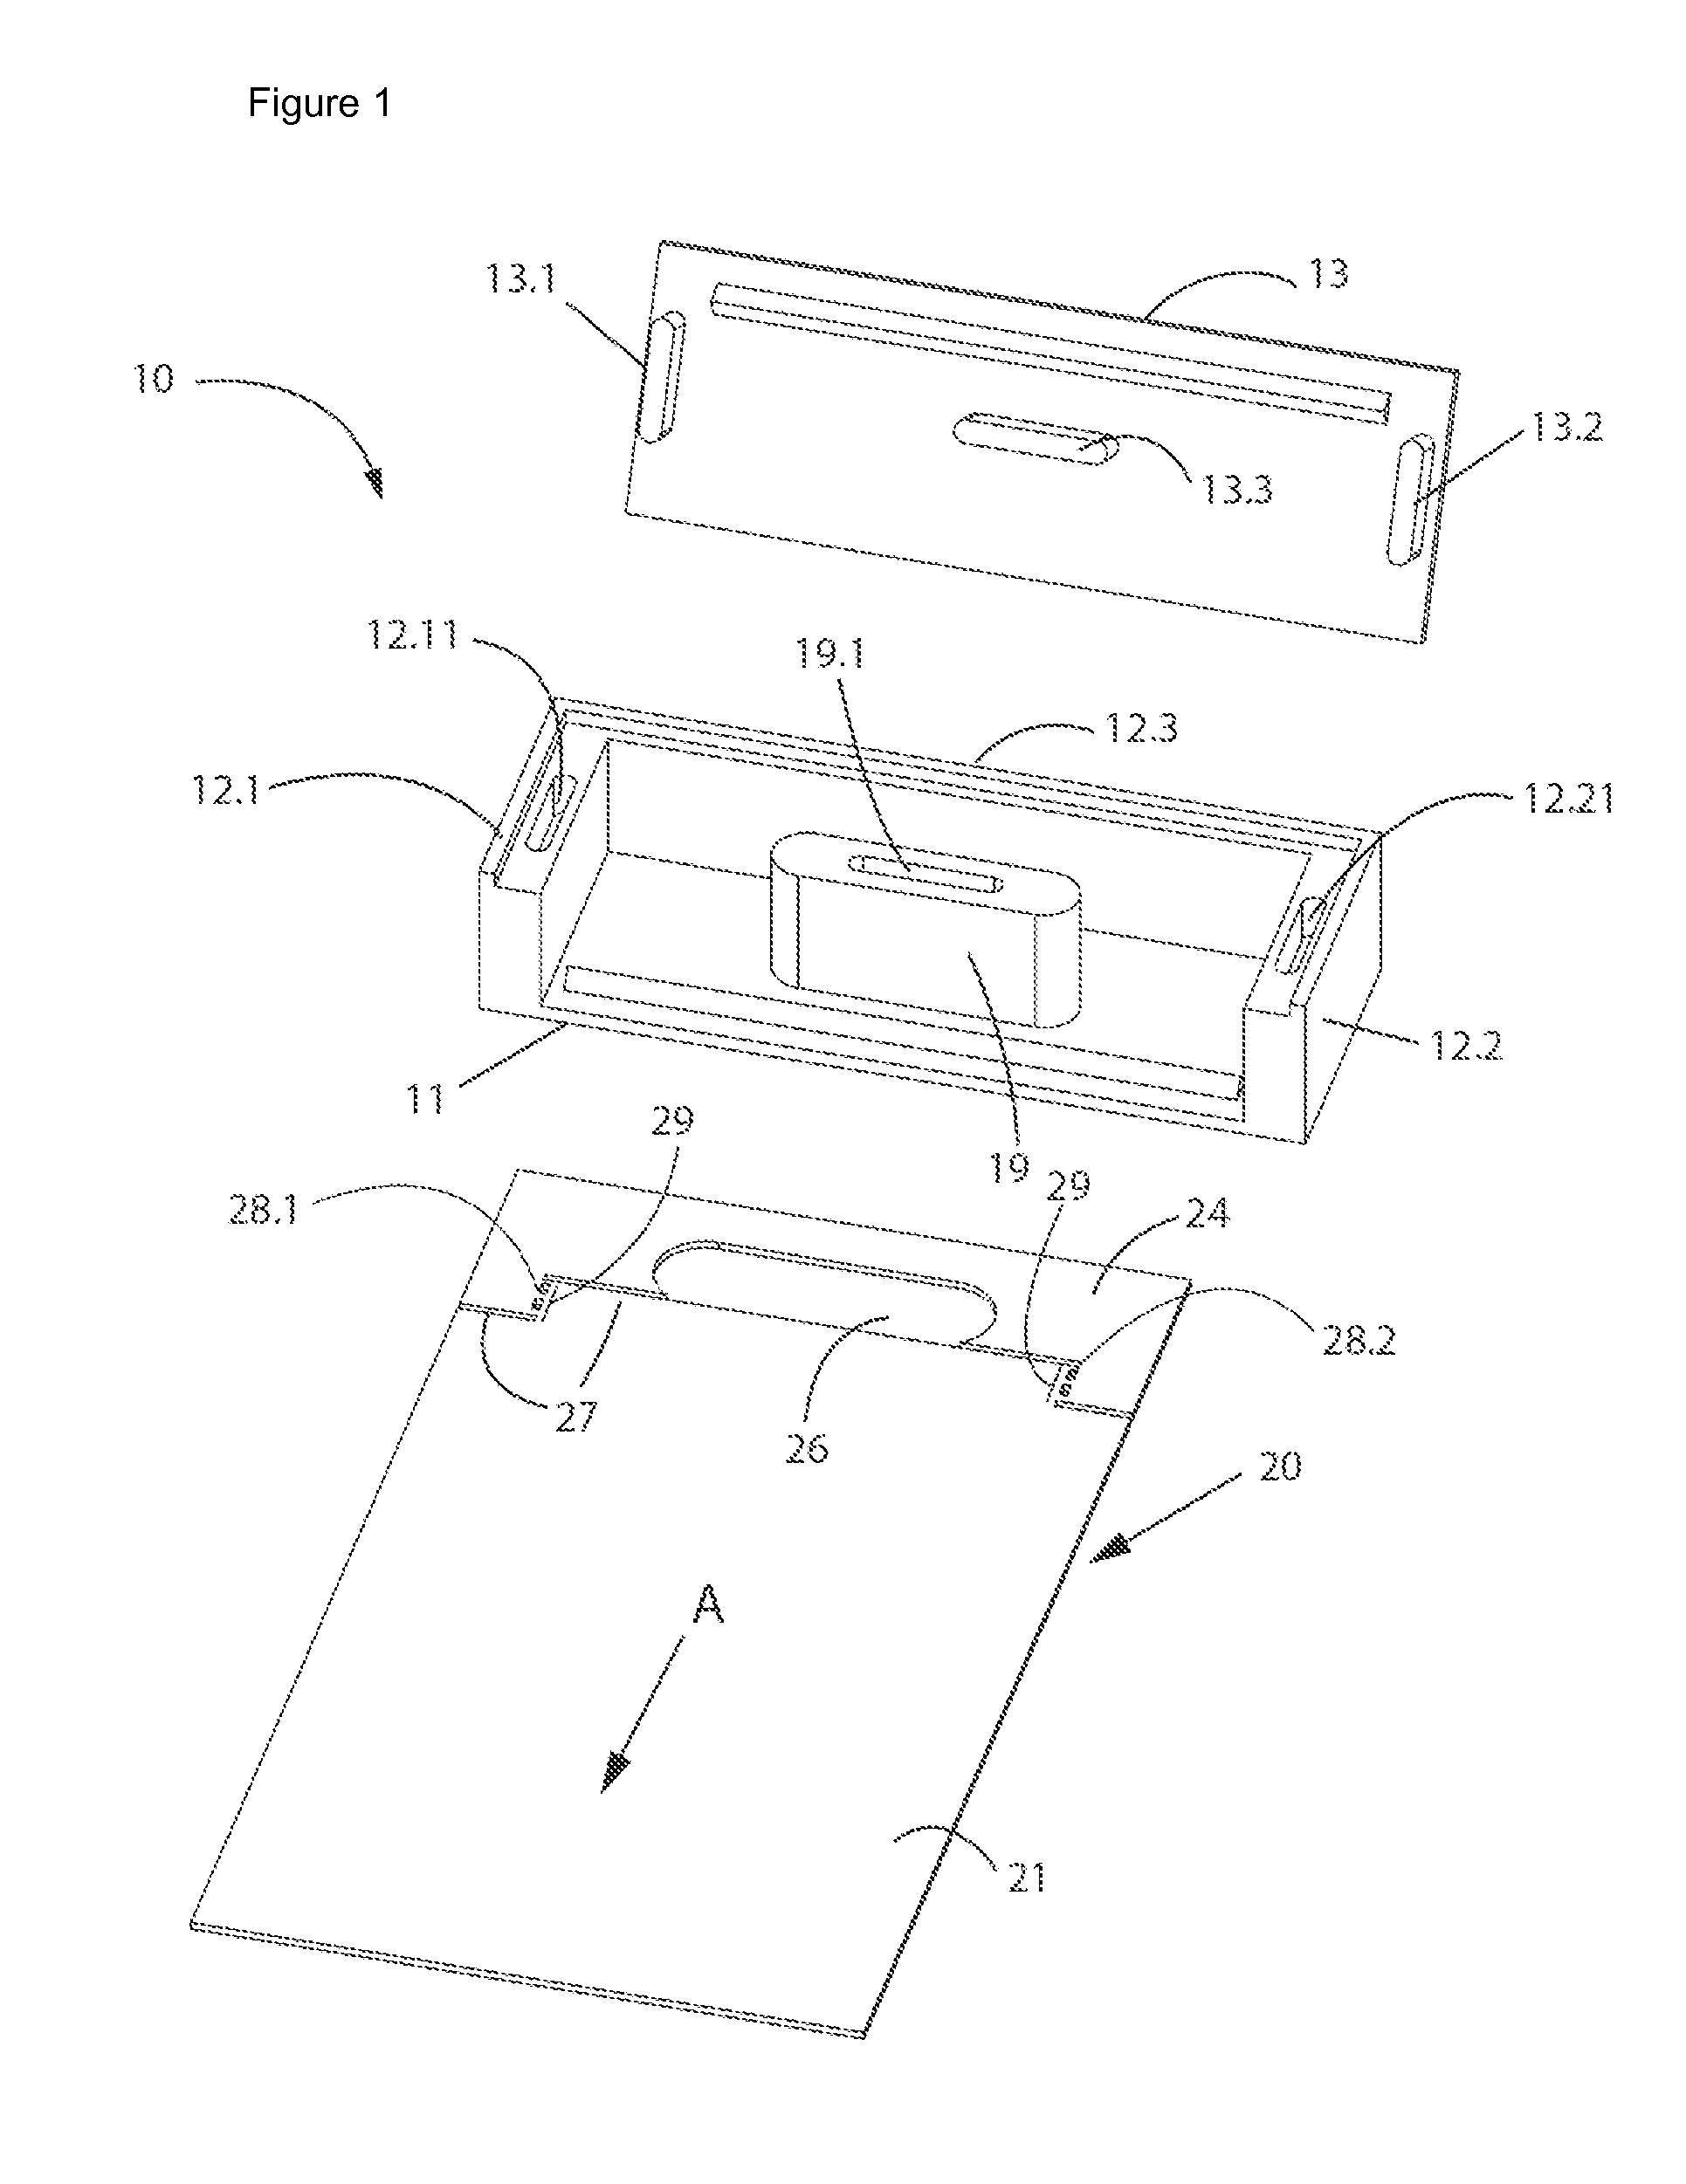 Dispenser for wafer pockets containing wafers and wafer pocket assembly